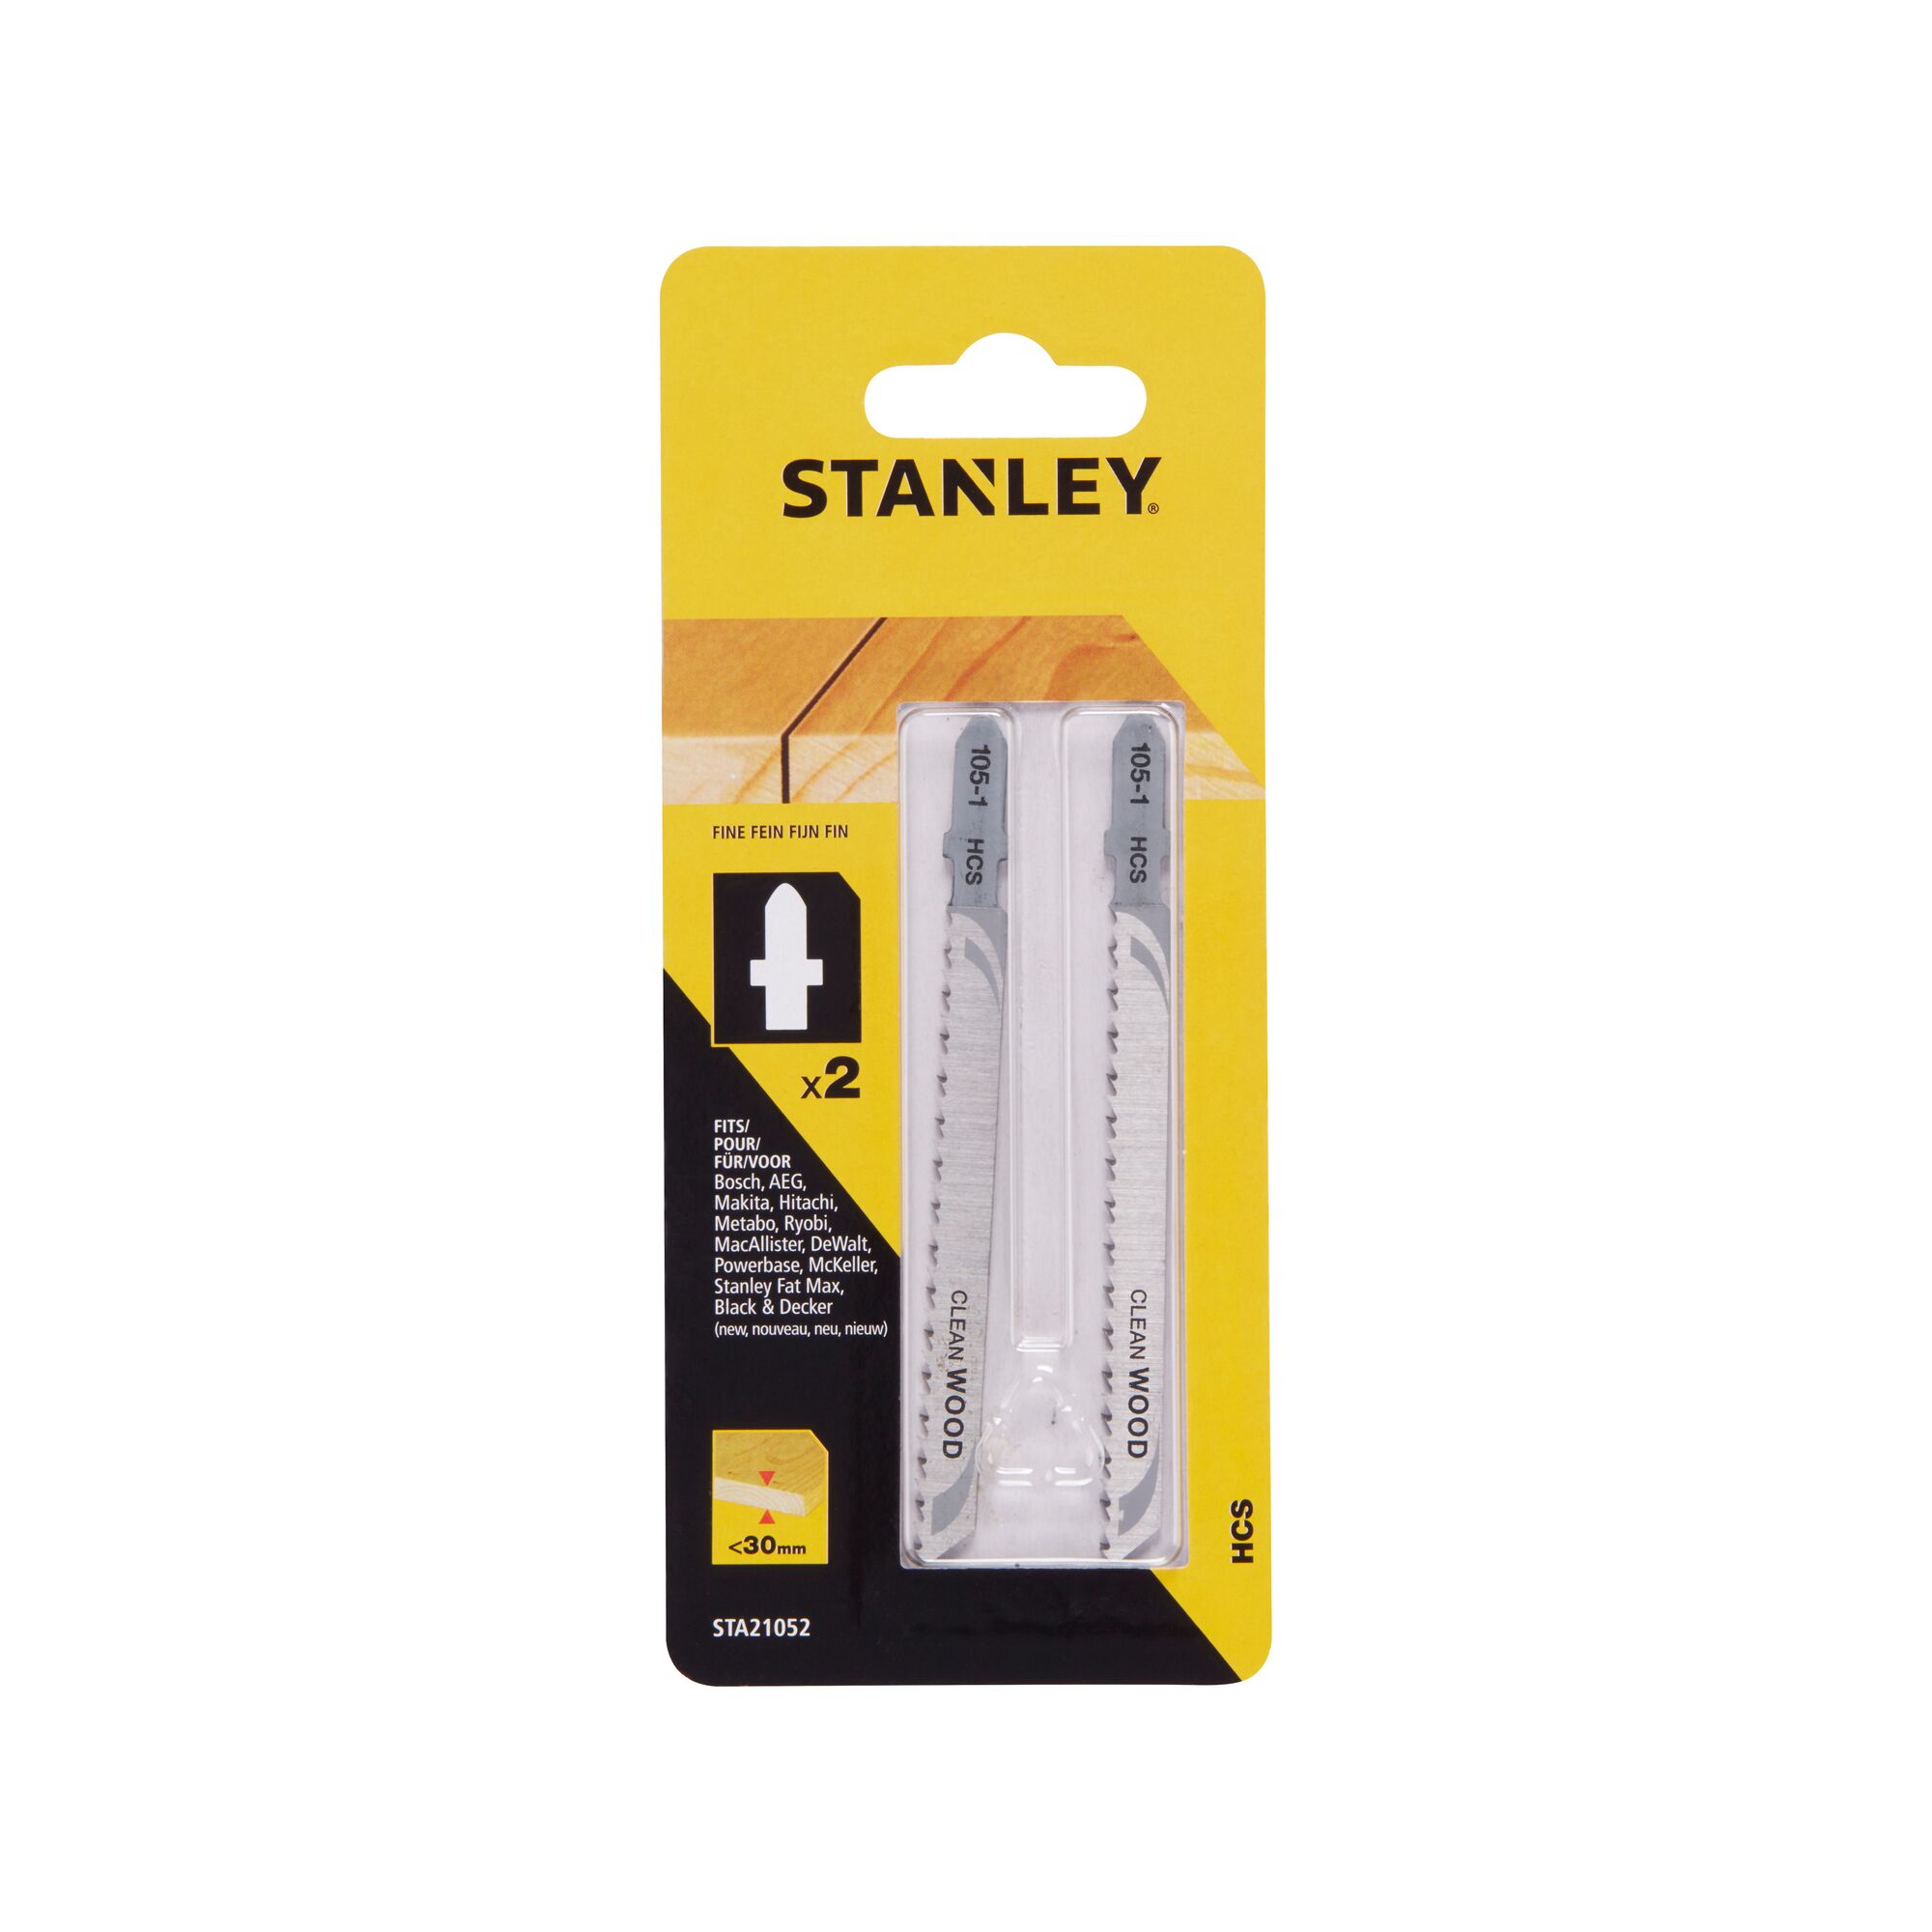 Drill, Verre, Tiles, Tige cylindrique forets Stanley STA53242-QZ foret 